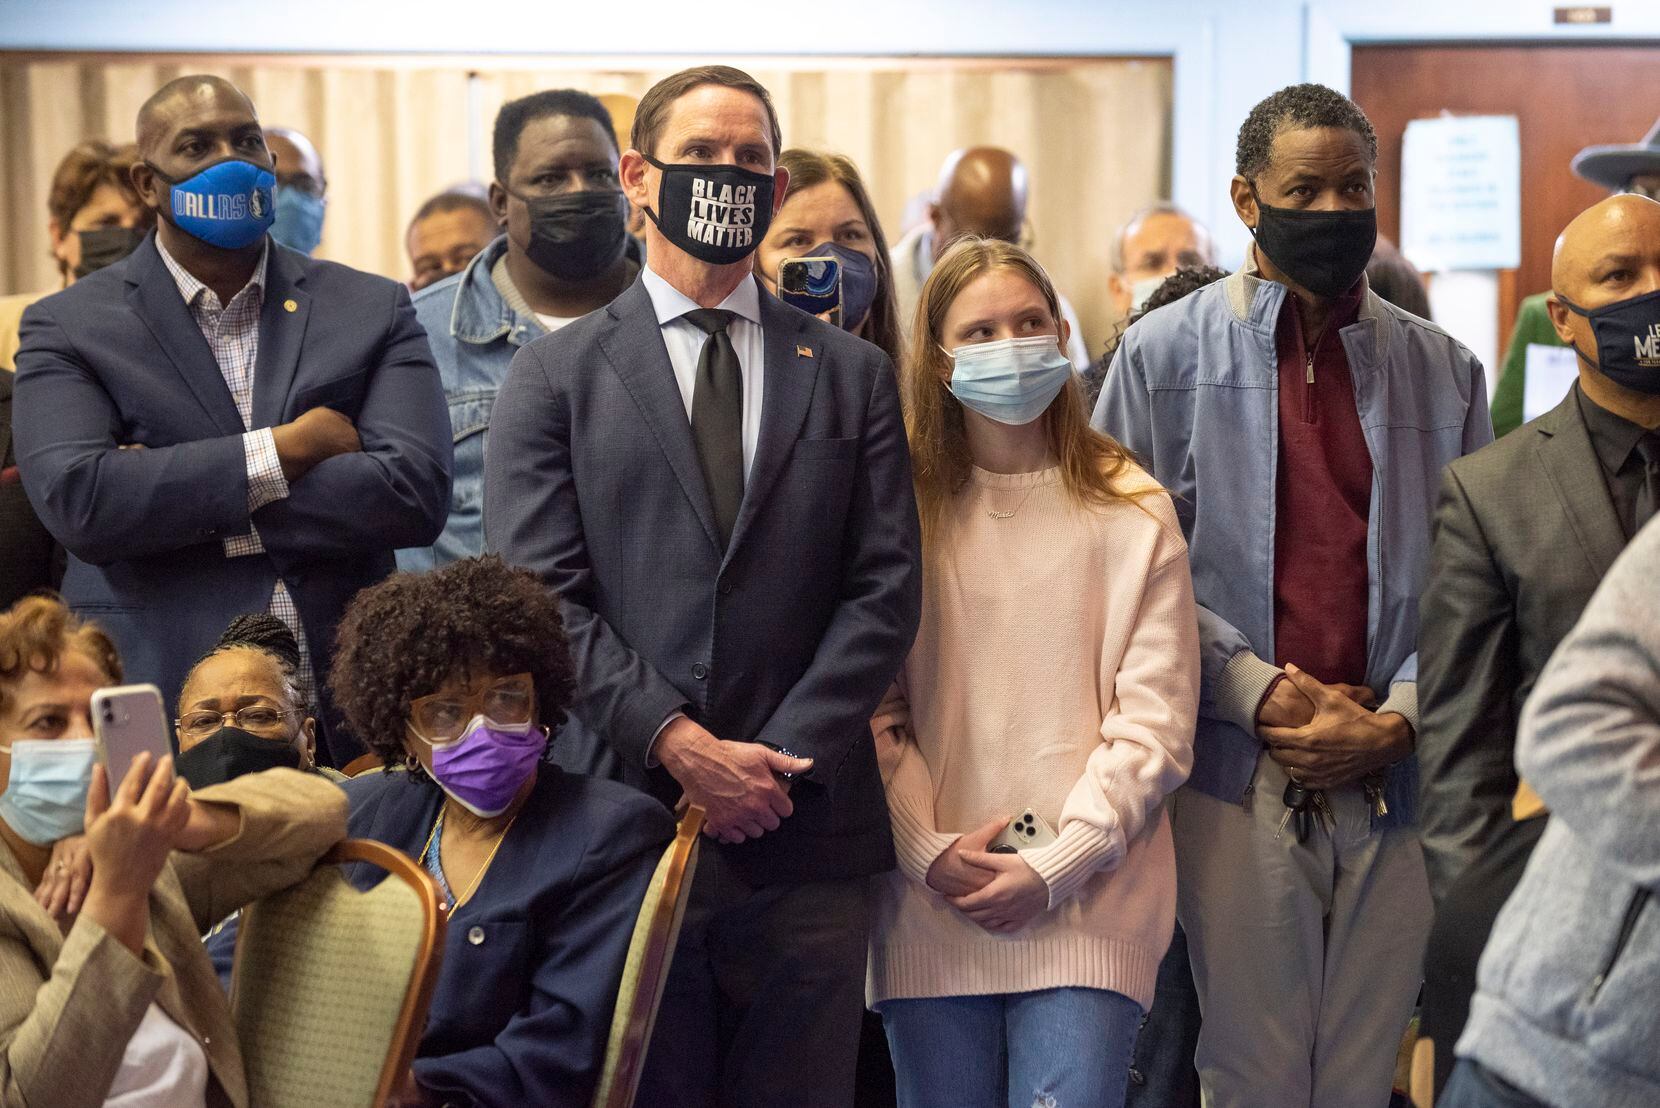 Dallas County Judge Clay Jenkins, wearing a Black Lives Matter mask, stands next to his daughter Madeleine Jenkins as they listen to U.S. Rep. Eddie Bernice Johnson announce that she will retire from Congress during “The Justice Tour" luncheon for Democratic Party activists and judicial candidates, at Kirkwood Temple CME Church in Dallas, on Saturday, Nov. 20, 2021. 